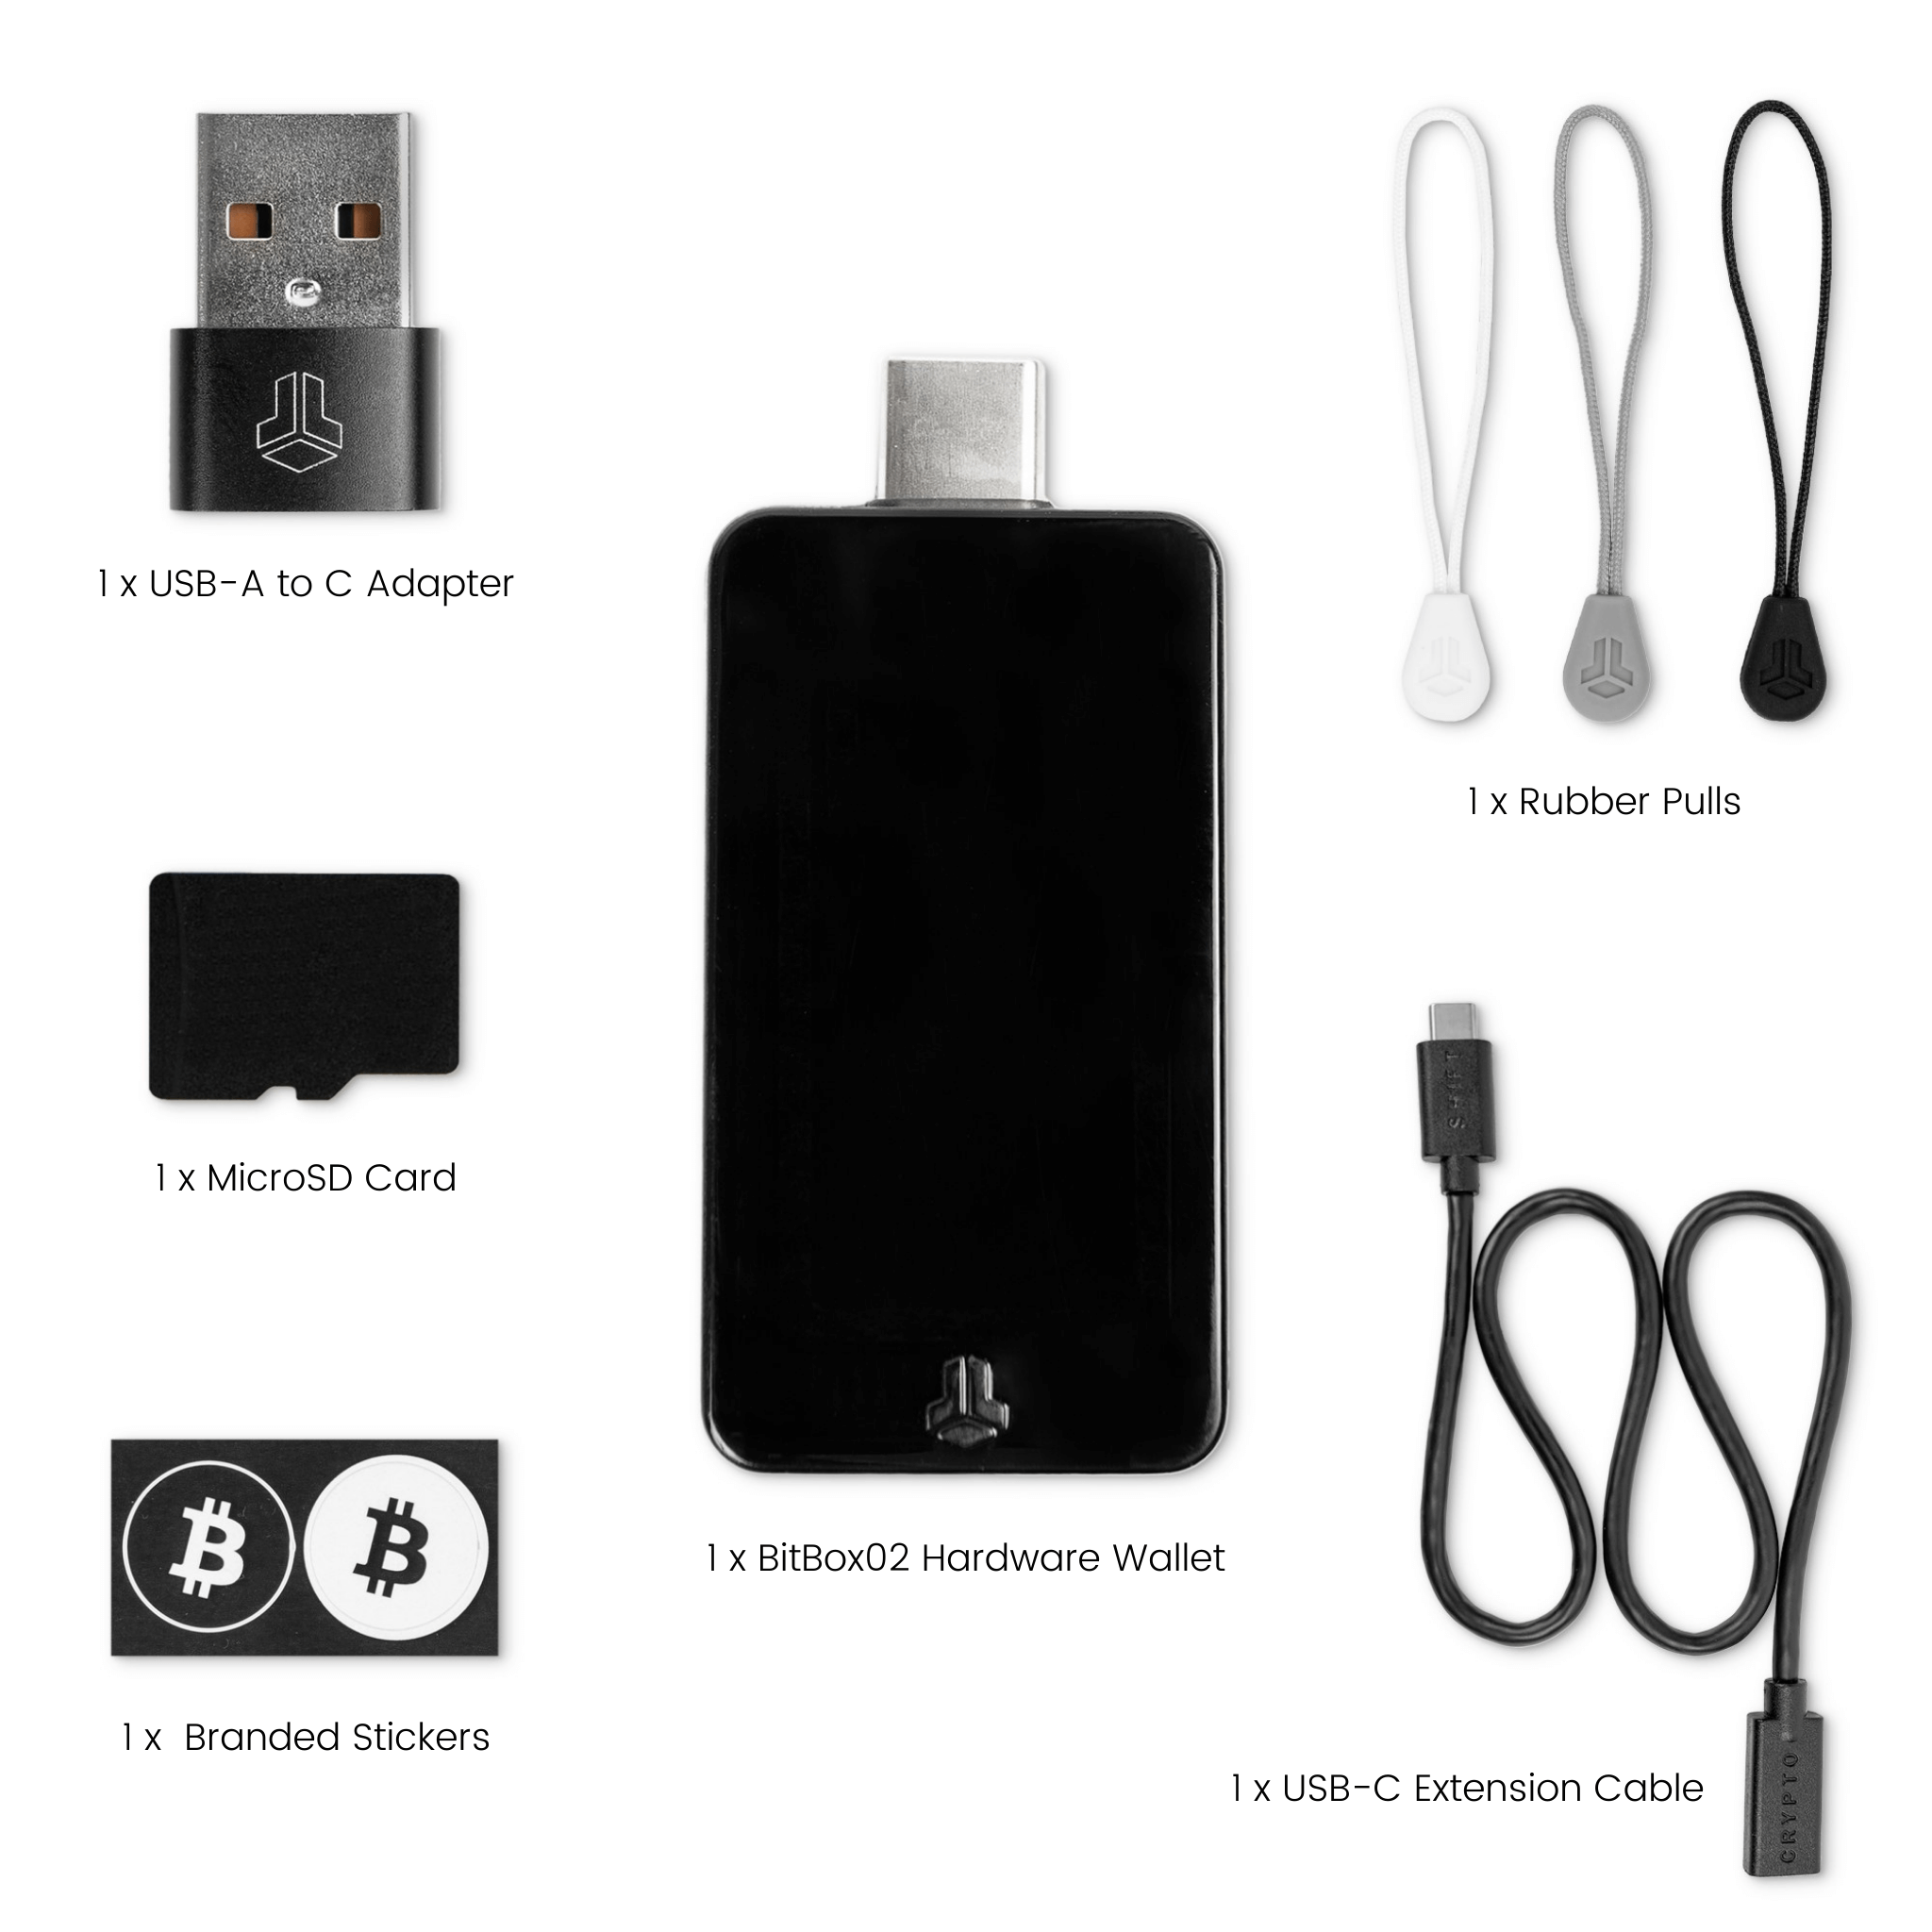 BitBox02 Multi Edition Cryptocurrency Hardware Wallet Package Contents